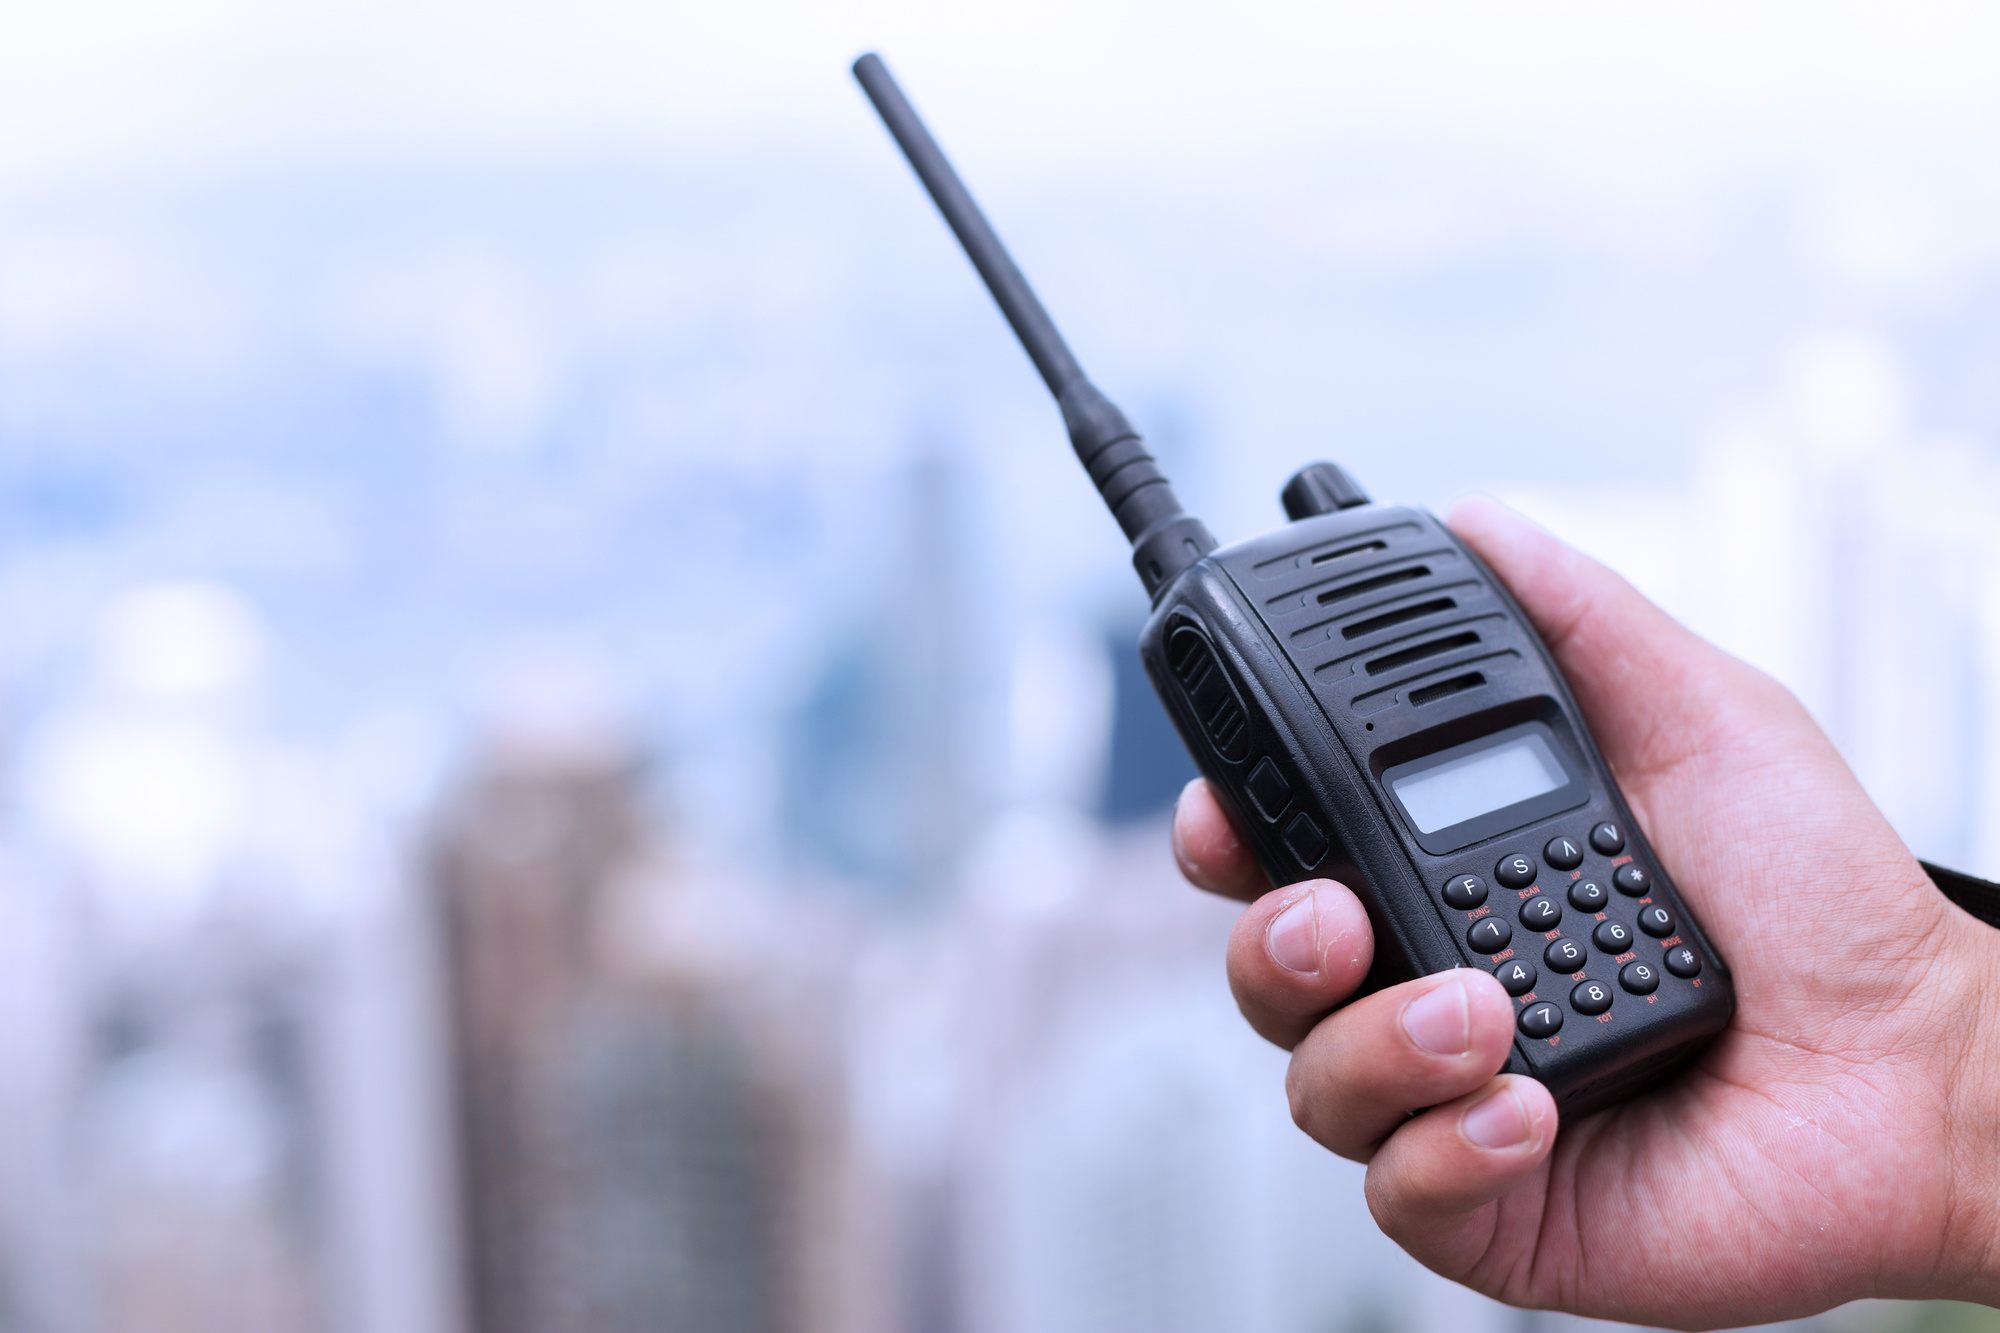 Are you wondering if walkie talkies are right for your business? Click here for five benefits of using two-way radios for your business.